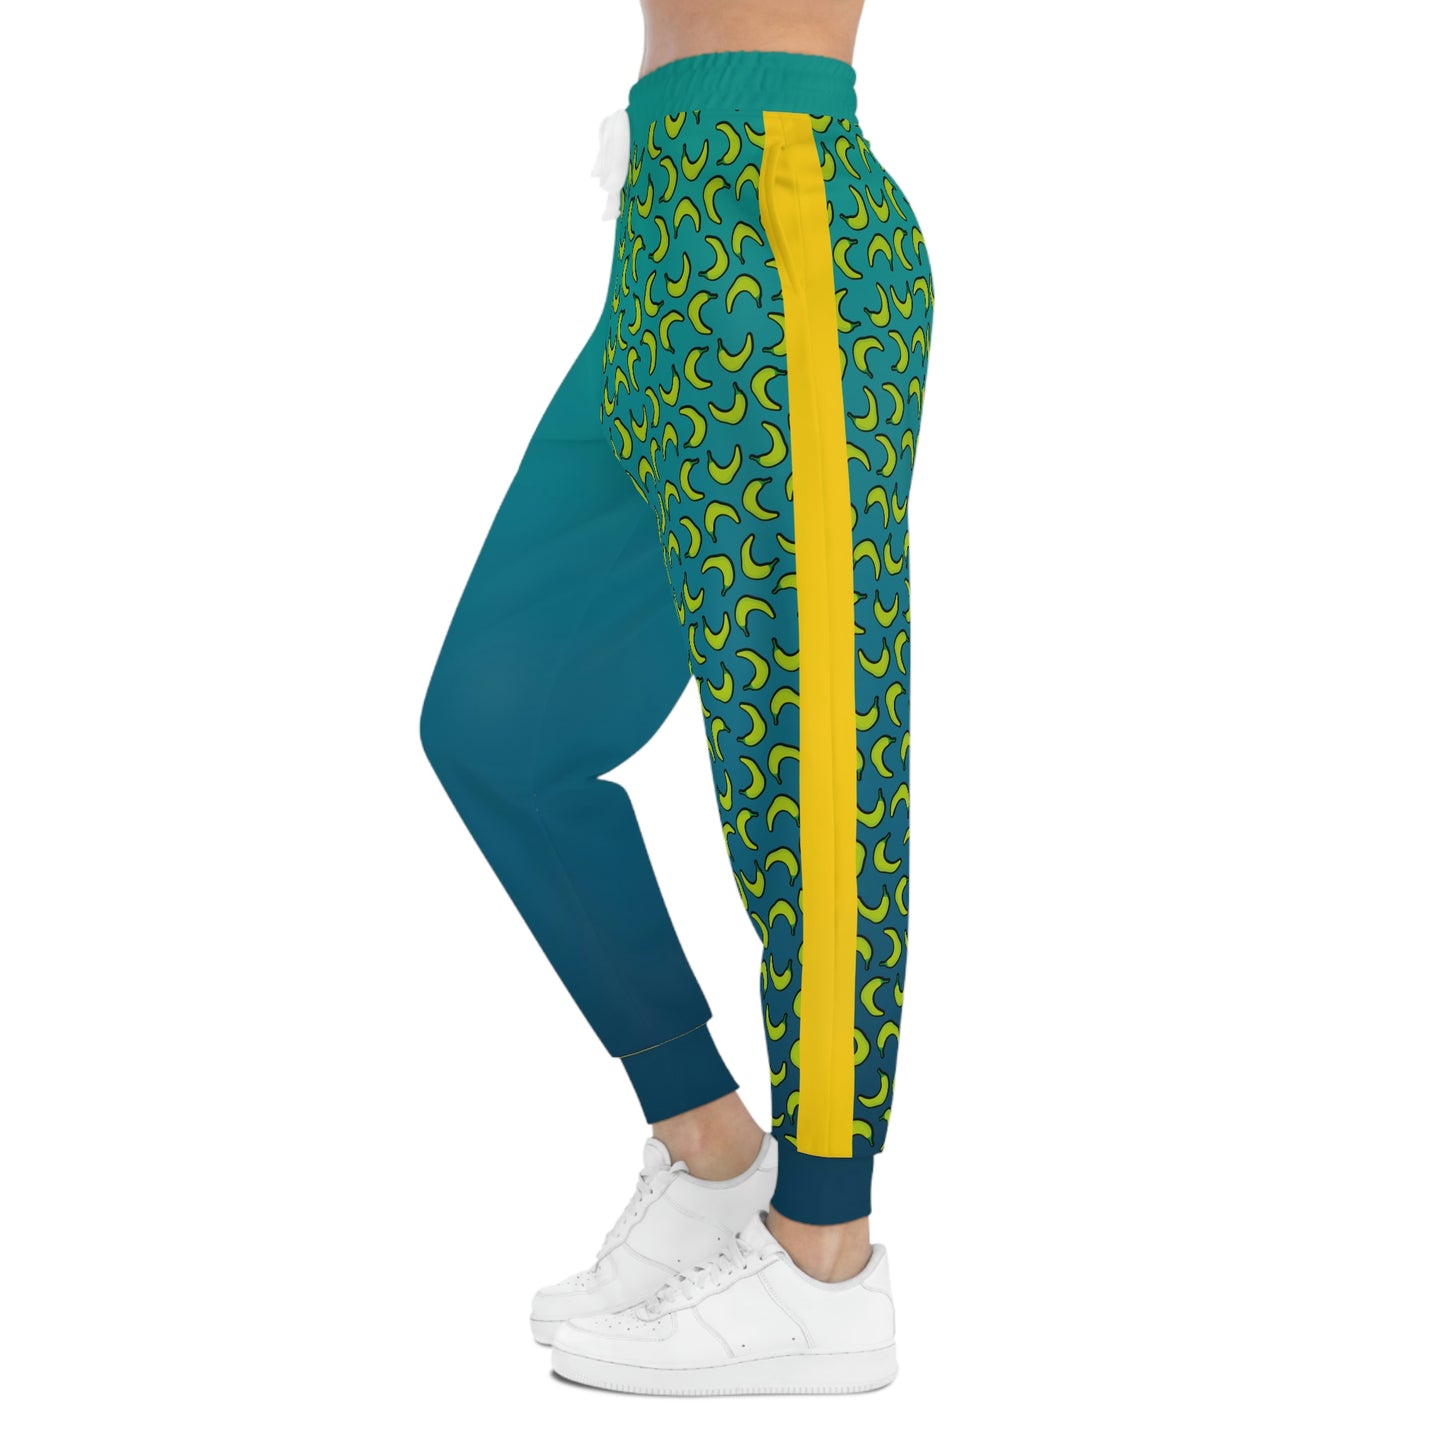 Weirdo | Jogging pants for women who are HOT! This joggers have green peppers printed at one leg, the other leg has a blue/turquoise color.